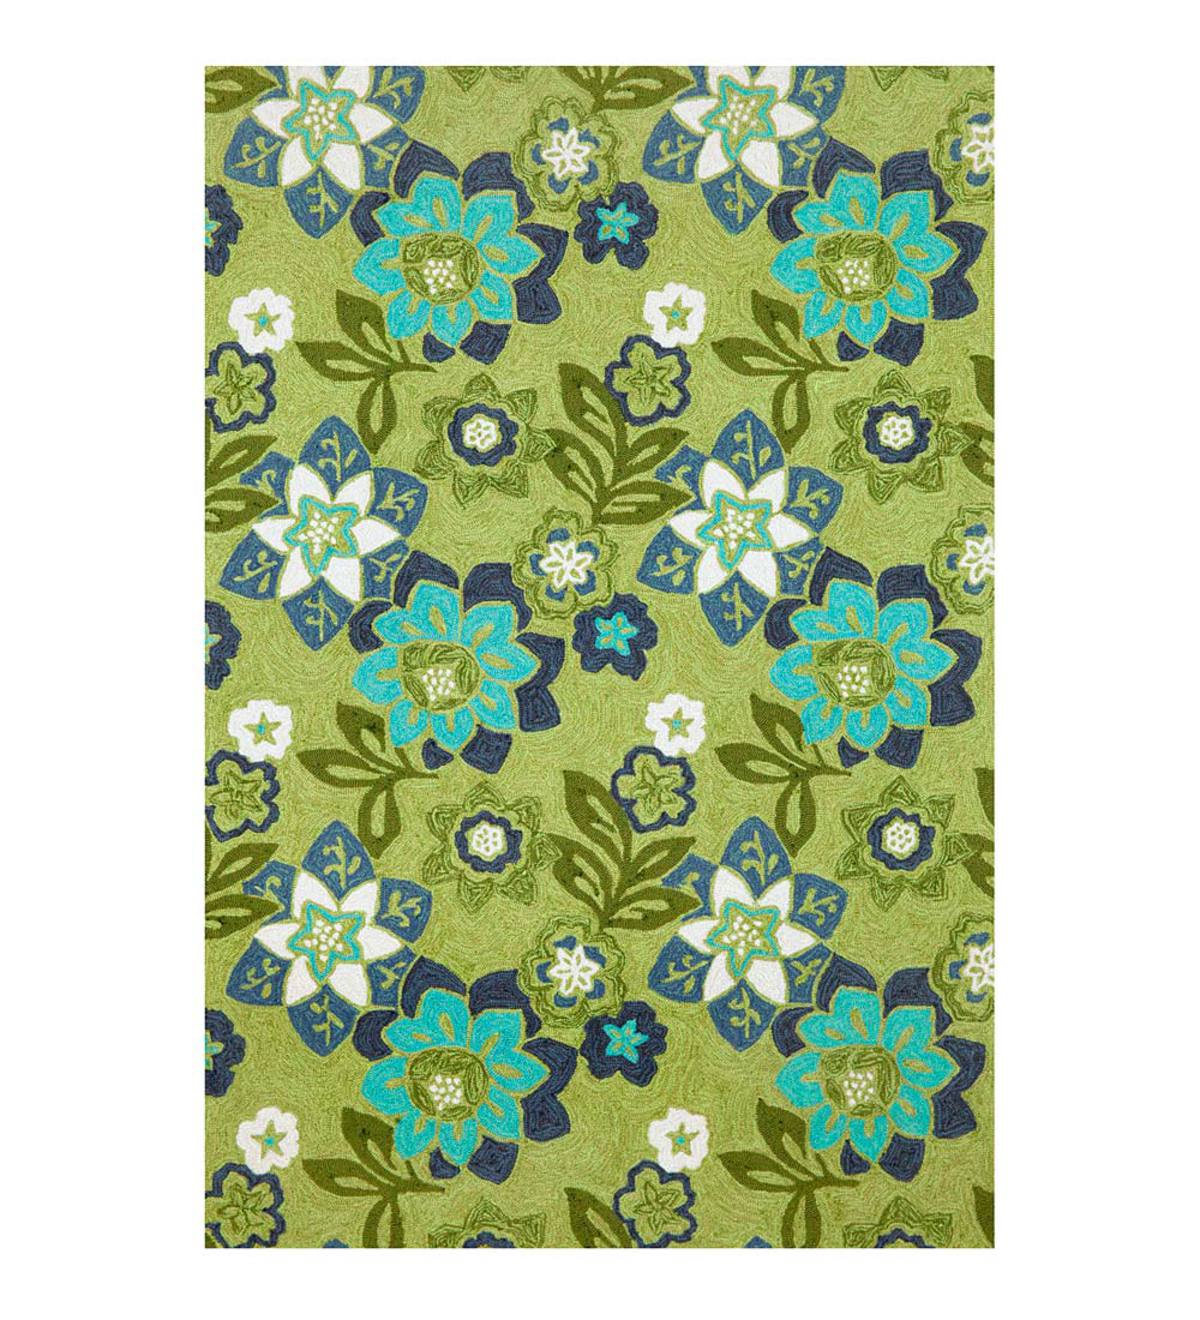 Blue and Green Floral Accent Rug, 7'6"W x 9'6"L